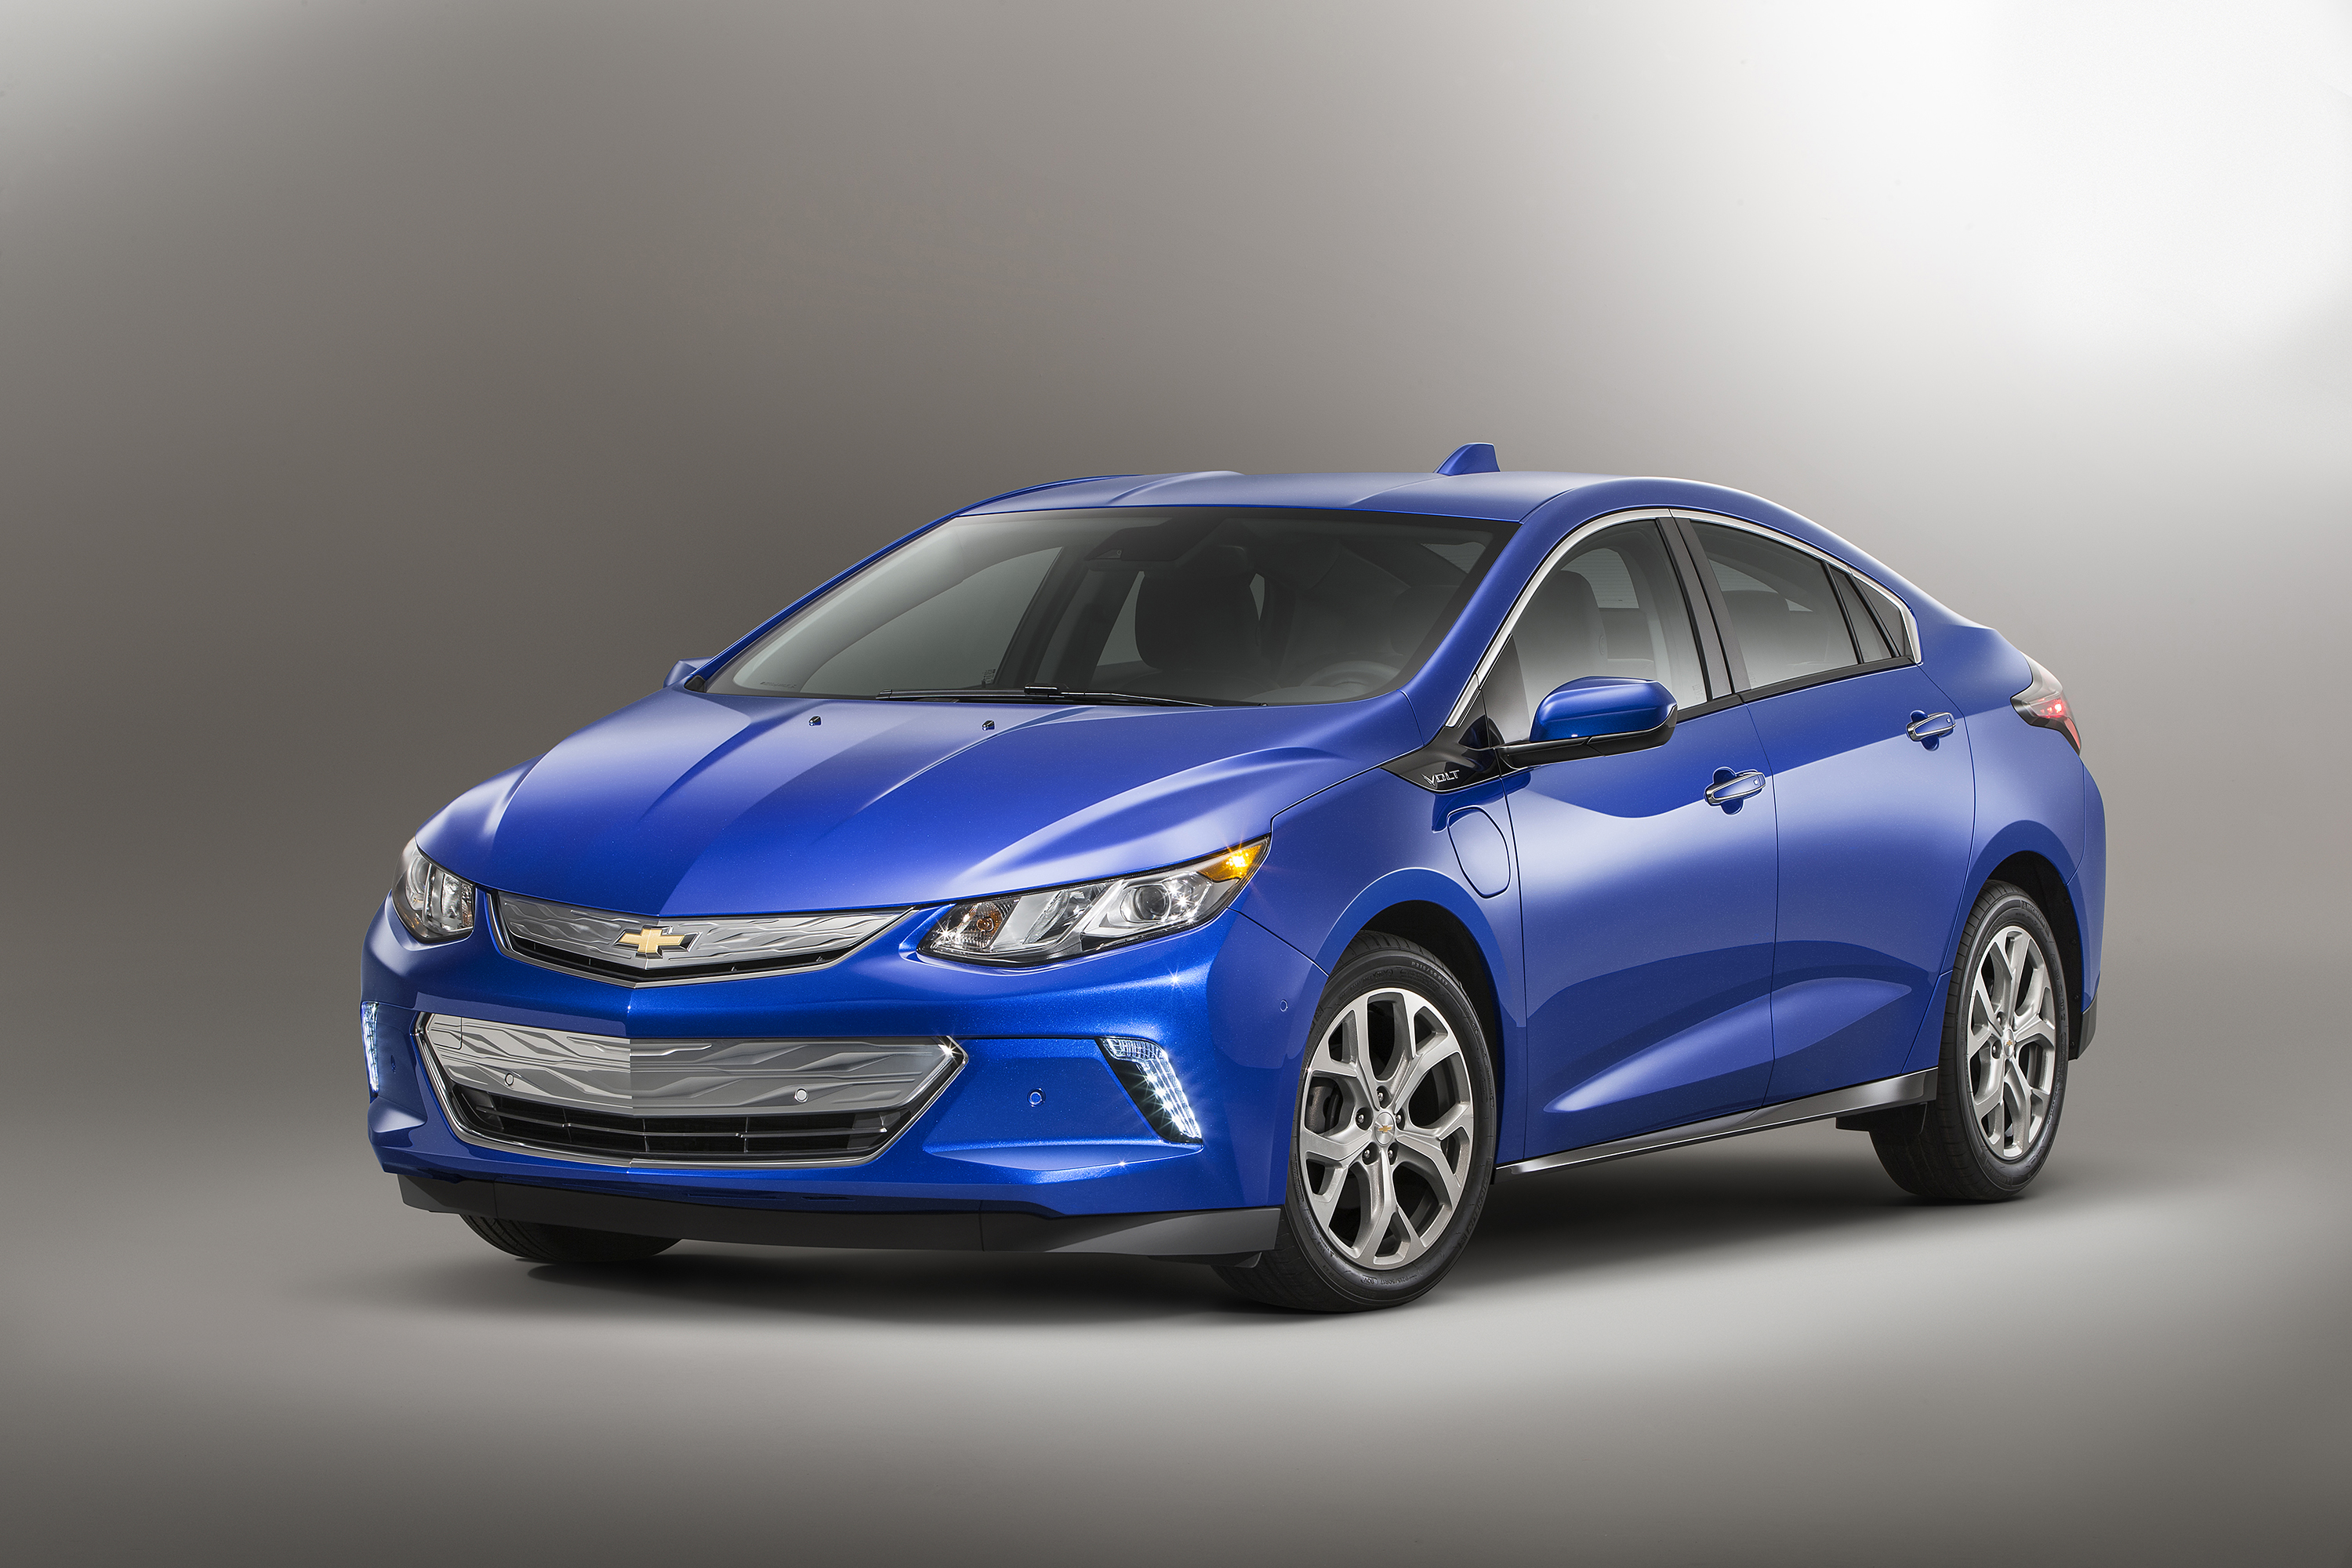 The all-new 2016 Chevrolet Volt electric car with extended range, showcasing a sleeker, sportier design that offers 50 miles of EV range, greater efficiency and stronger acceleration.